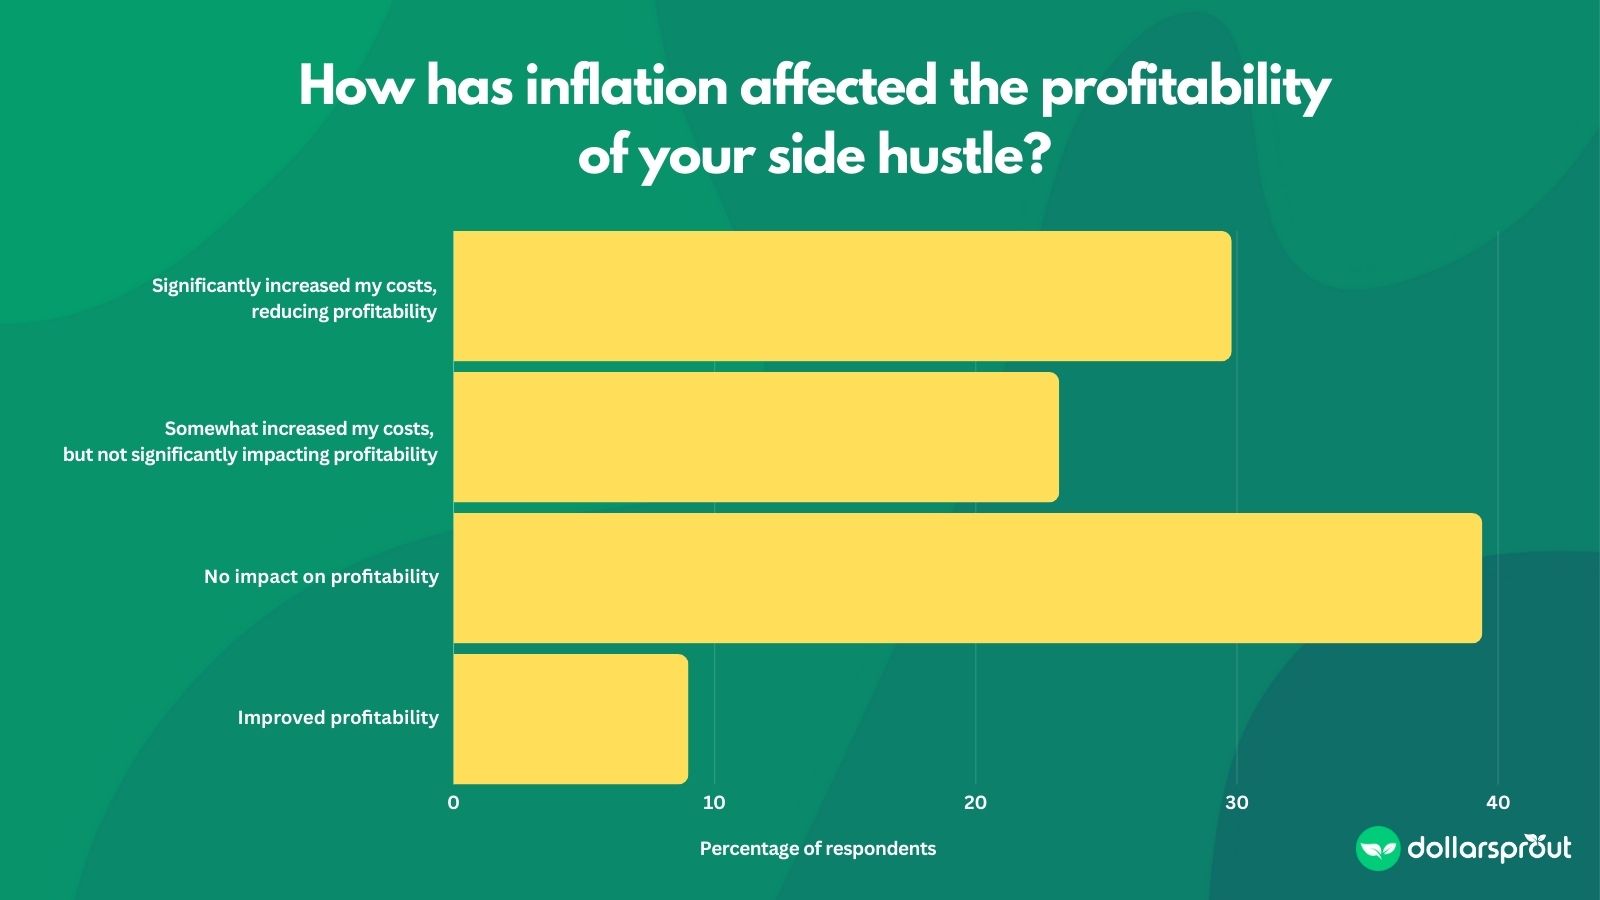 A bar chart showing the impact that inflation has had on side hustlers. 